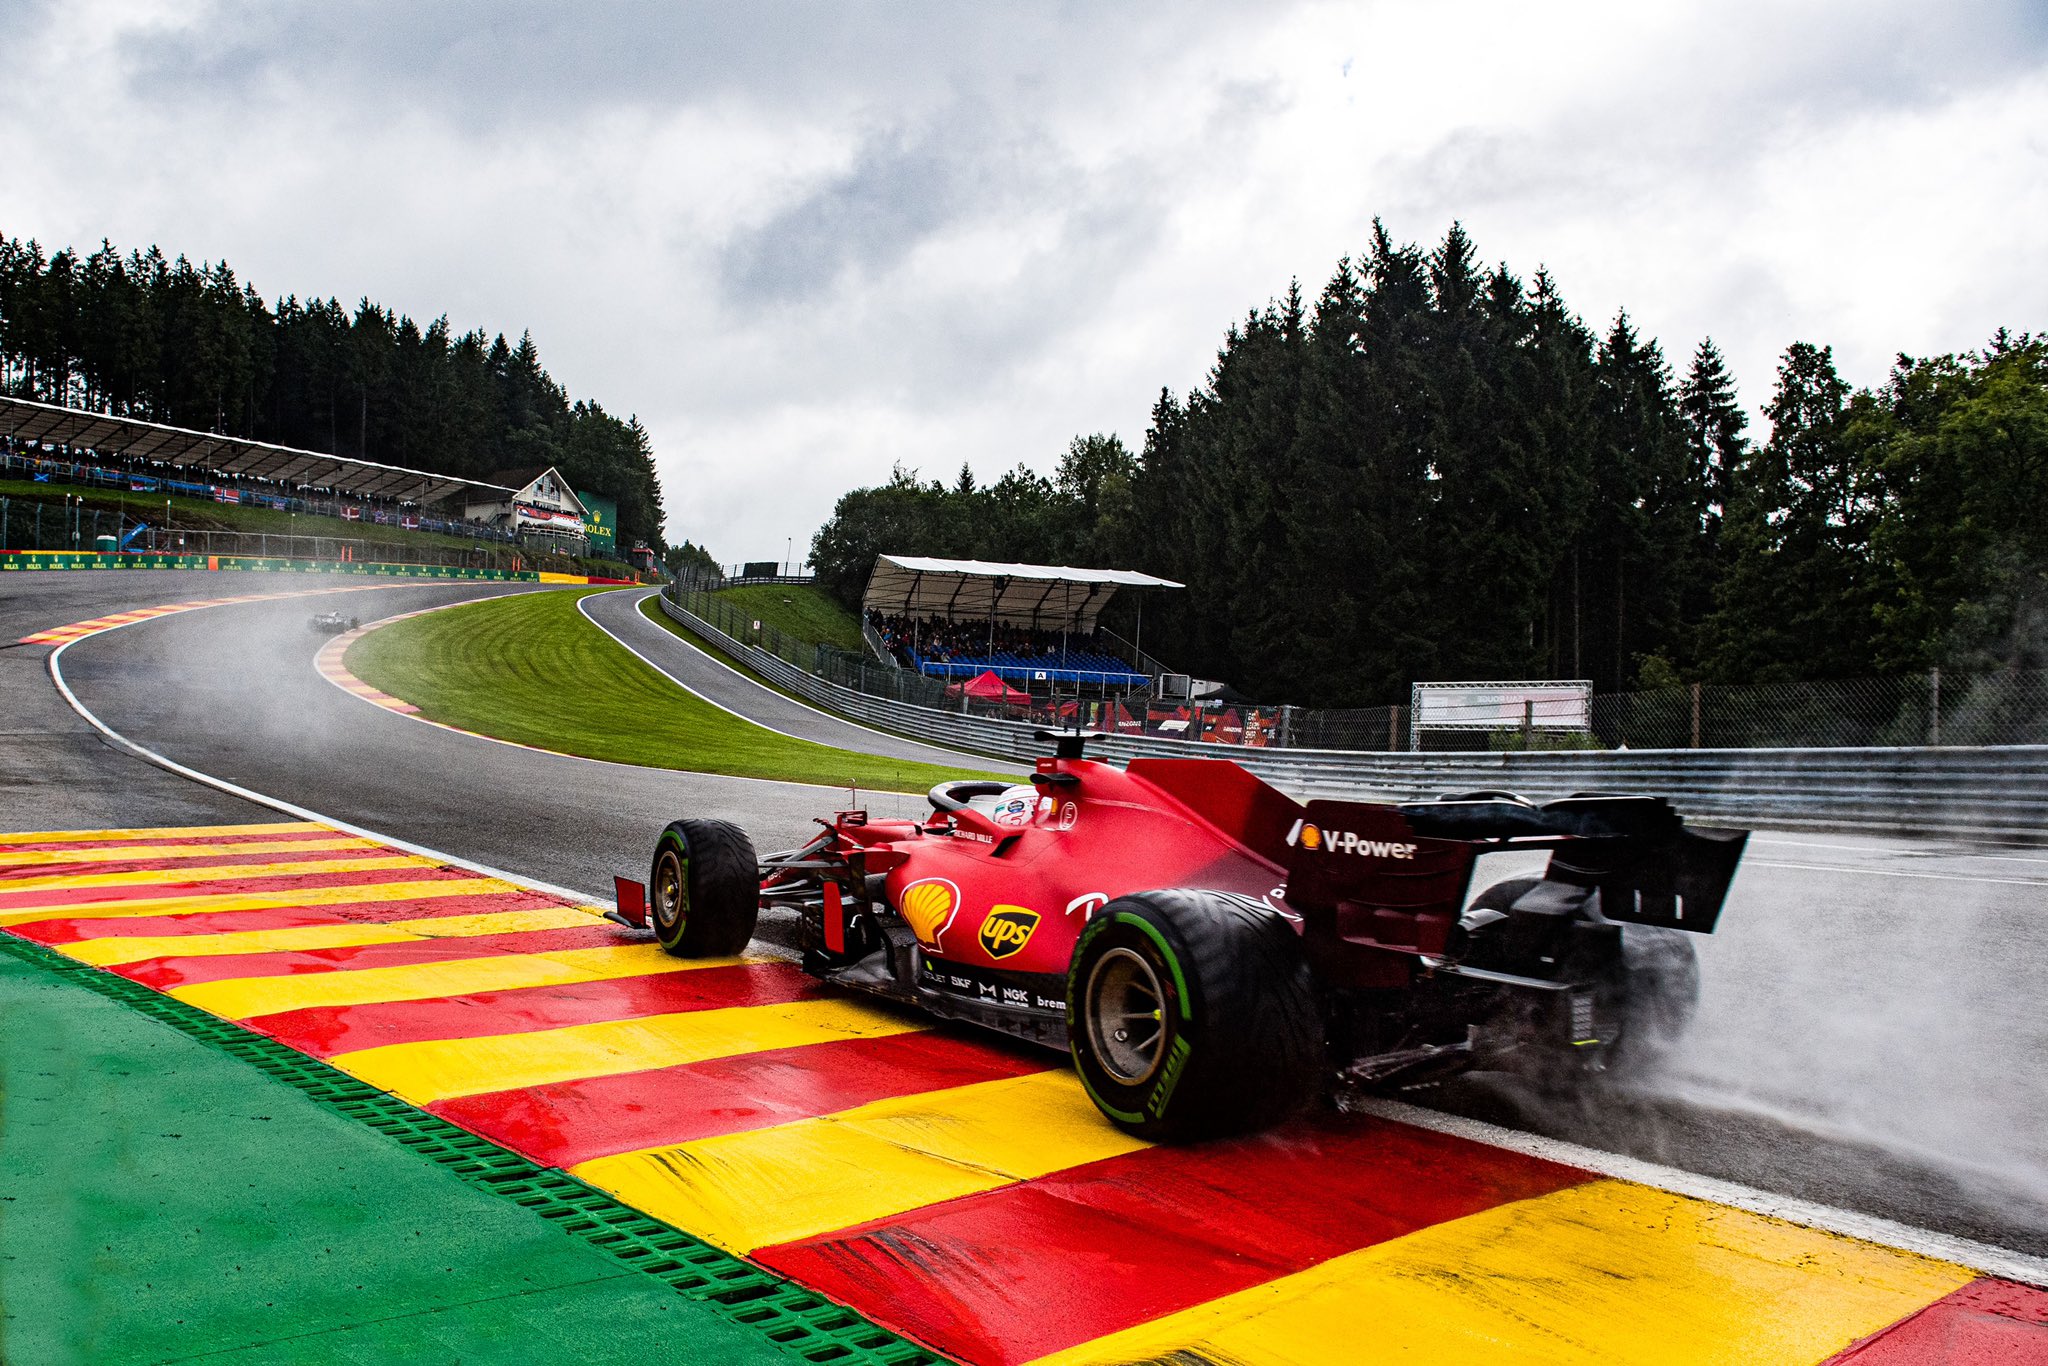 Formula 1 GP Spa: Broadcast, Schedule, Starting Time, Circuit & Qualifying of the Belgian GP